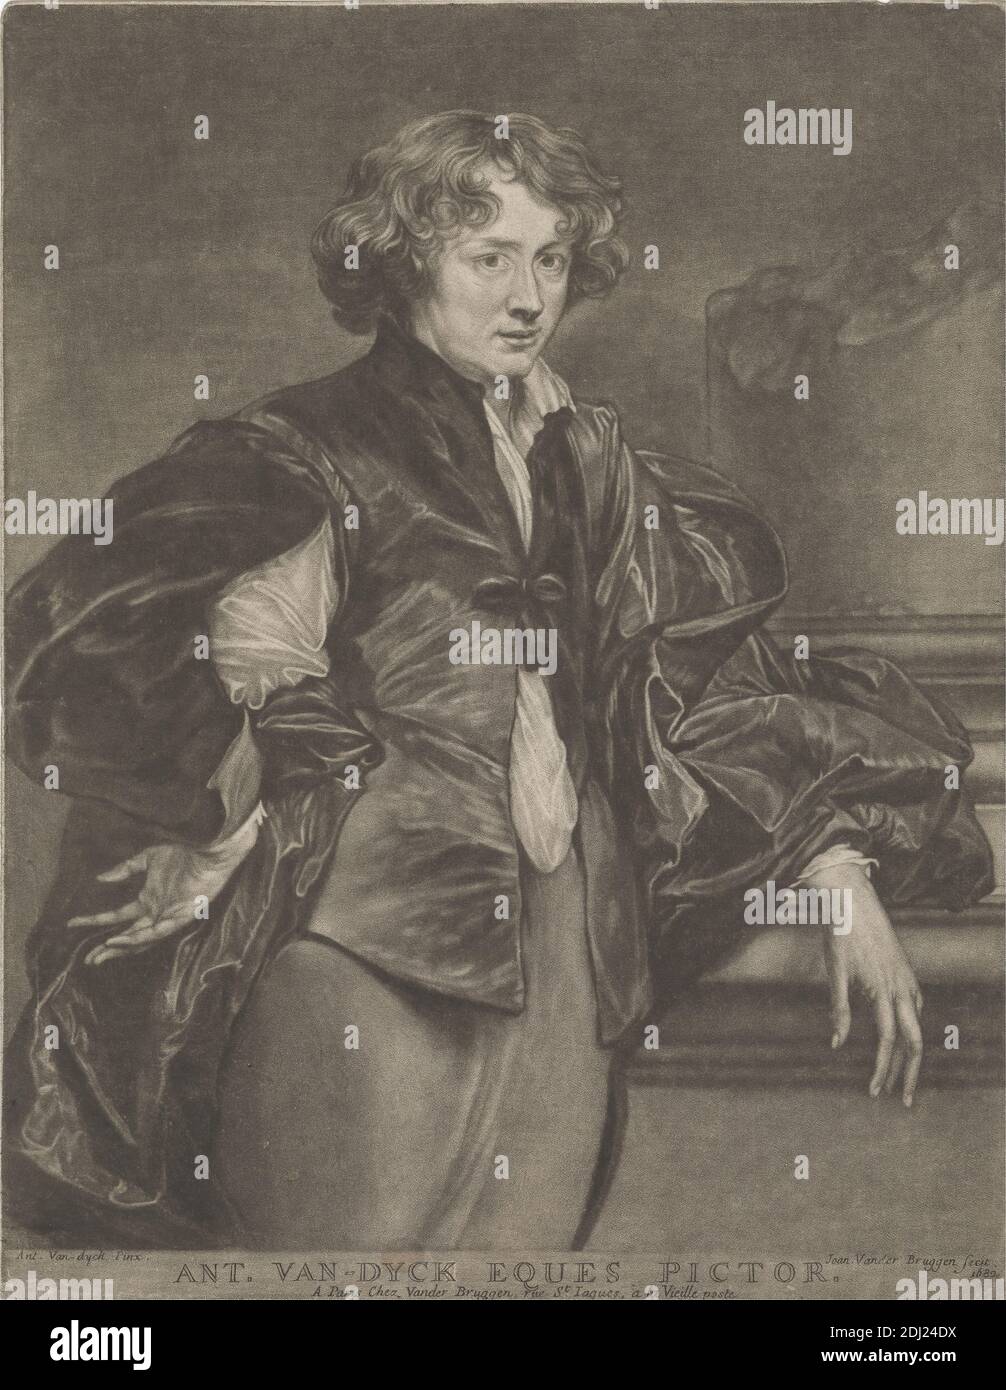 Anthony van Dyck, Eques Pictor, Print made by Jan van der Bruggen, 1649–1714, Dutch, Sir Anthony Van Dyck, 1599–1641, Flemish, active in Britain (1620–21; 1632–34; 1635–41), Published by Jan van der Bruggen, 1649–1714, Dutch, 1682, Mezzotint on moderately thick, slightly textured, cream laid paper, Sheet: 11 1/2 × 9 inches (29.2 × 22.9 cm) and Image: 11 × 8 7/8 inches (27.9 × 22.5 cm), artist, bow (costume accessory), cloak, cloth, column (architectural element), costume, curls, man, pillar, portrait, self-portrait Stock Photo